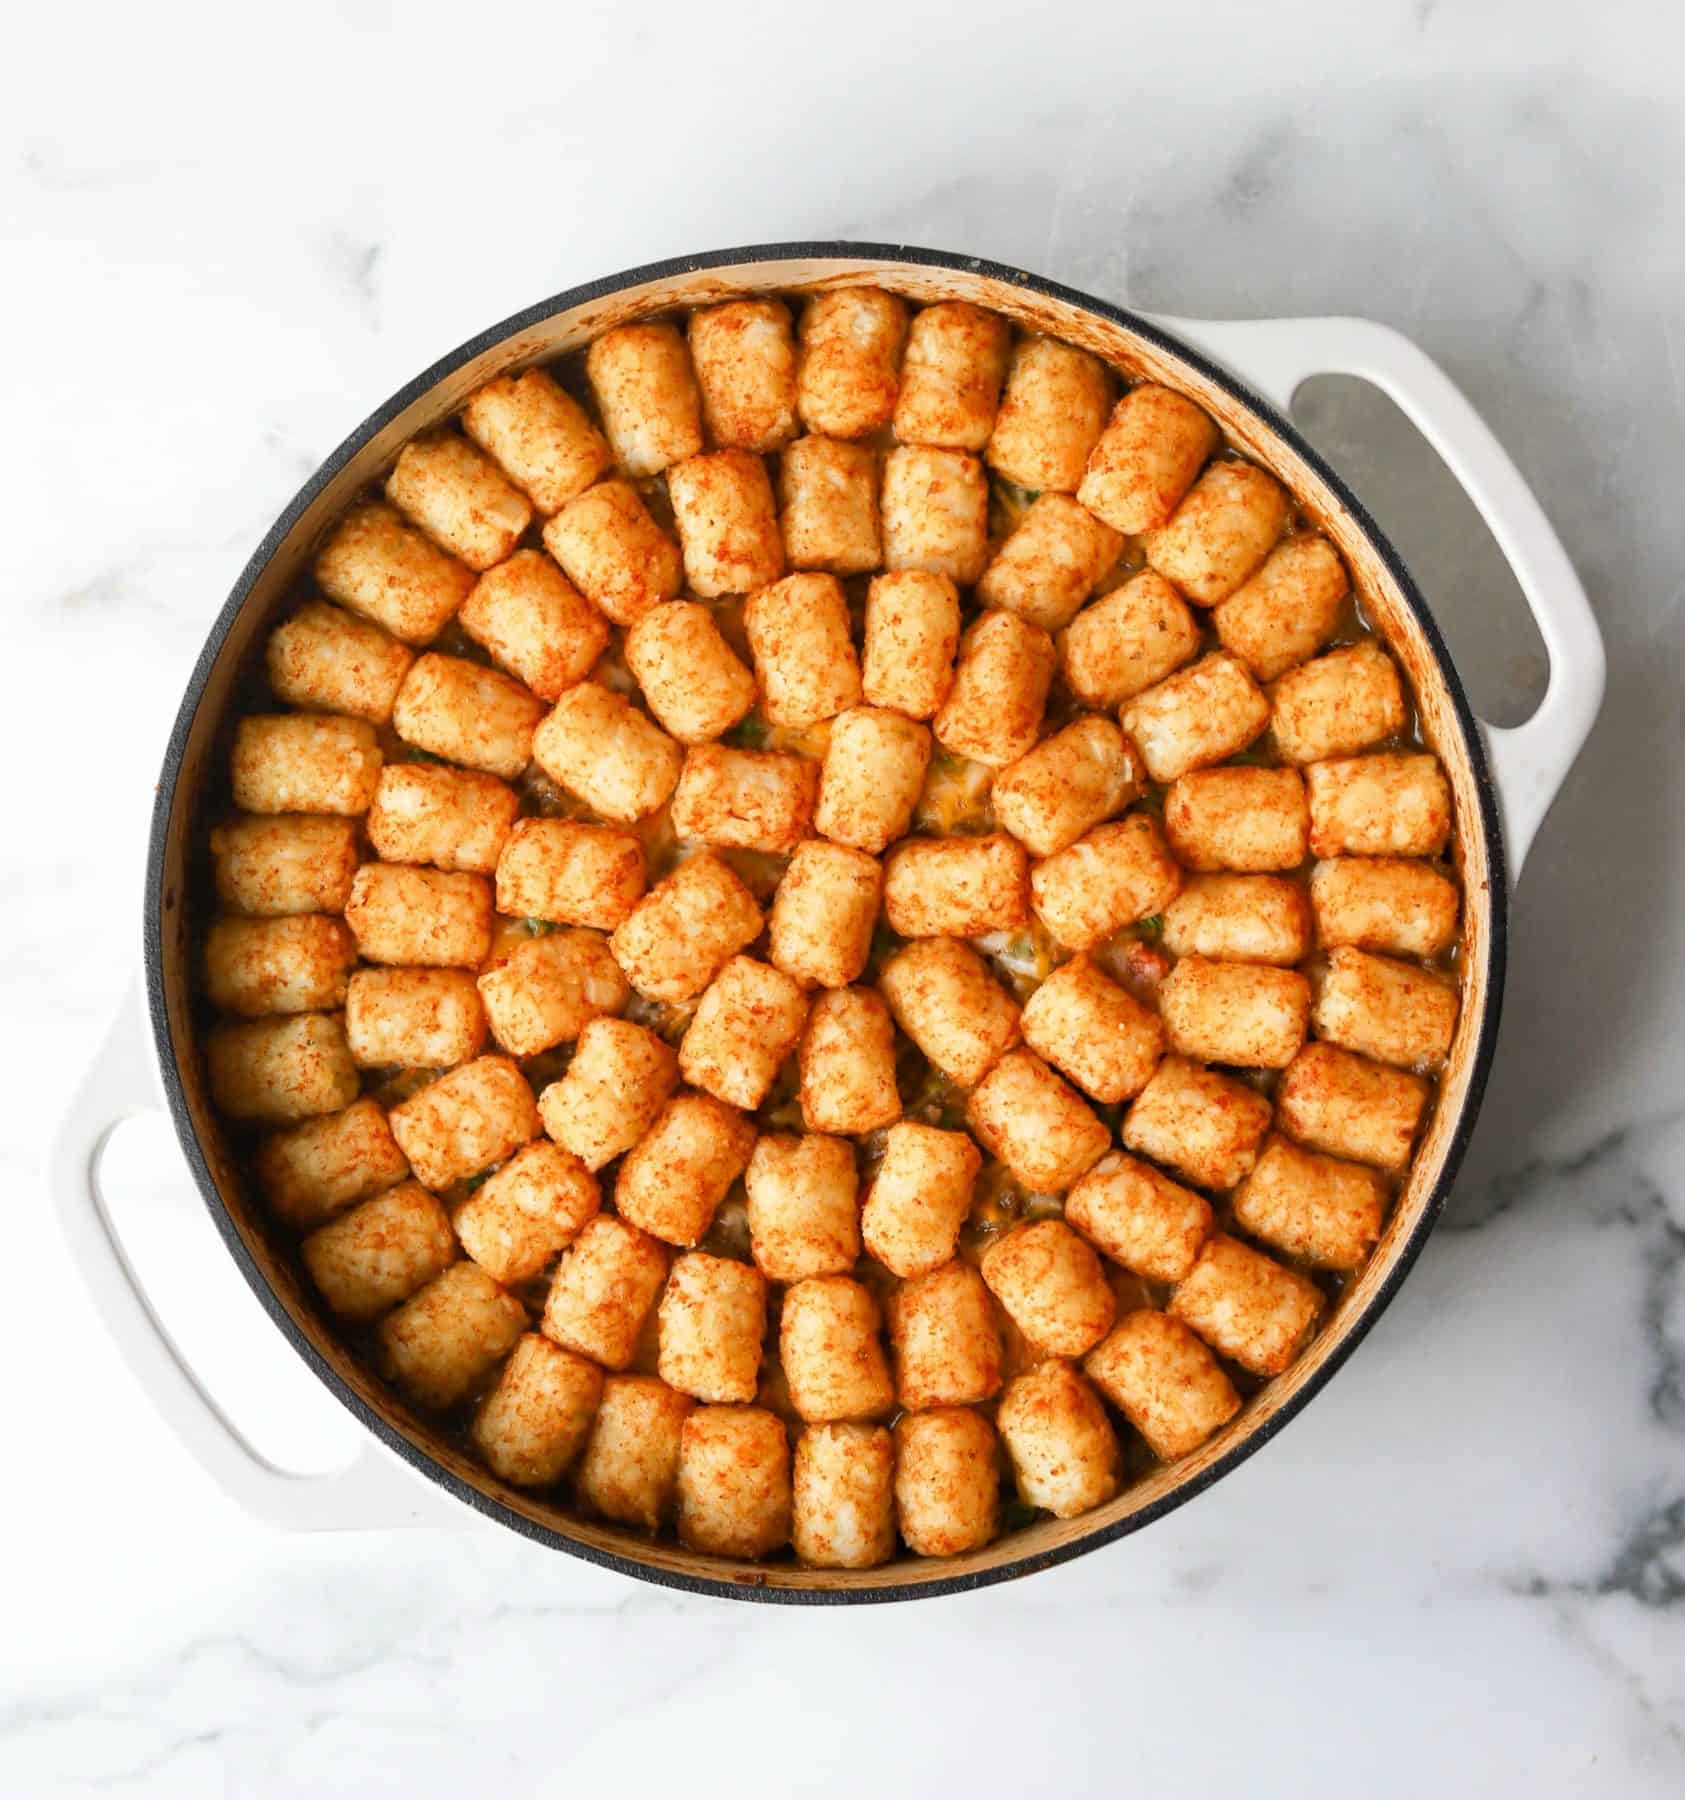 Tater tot casserole in white dish